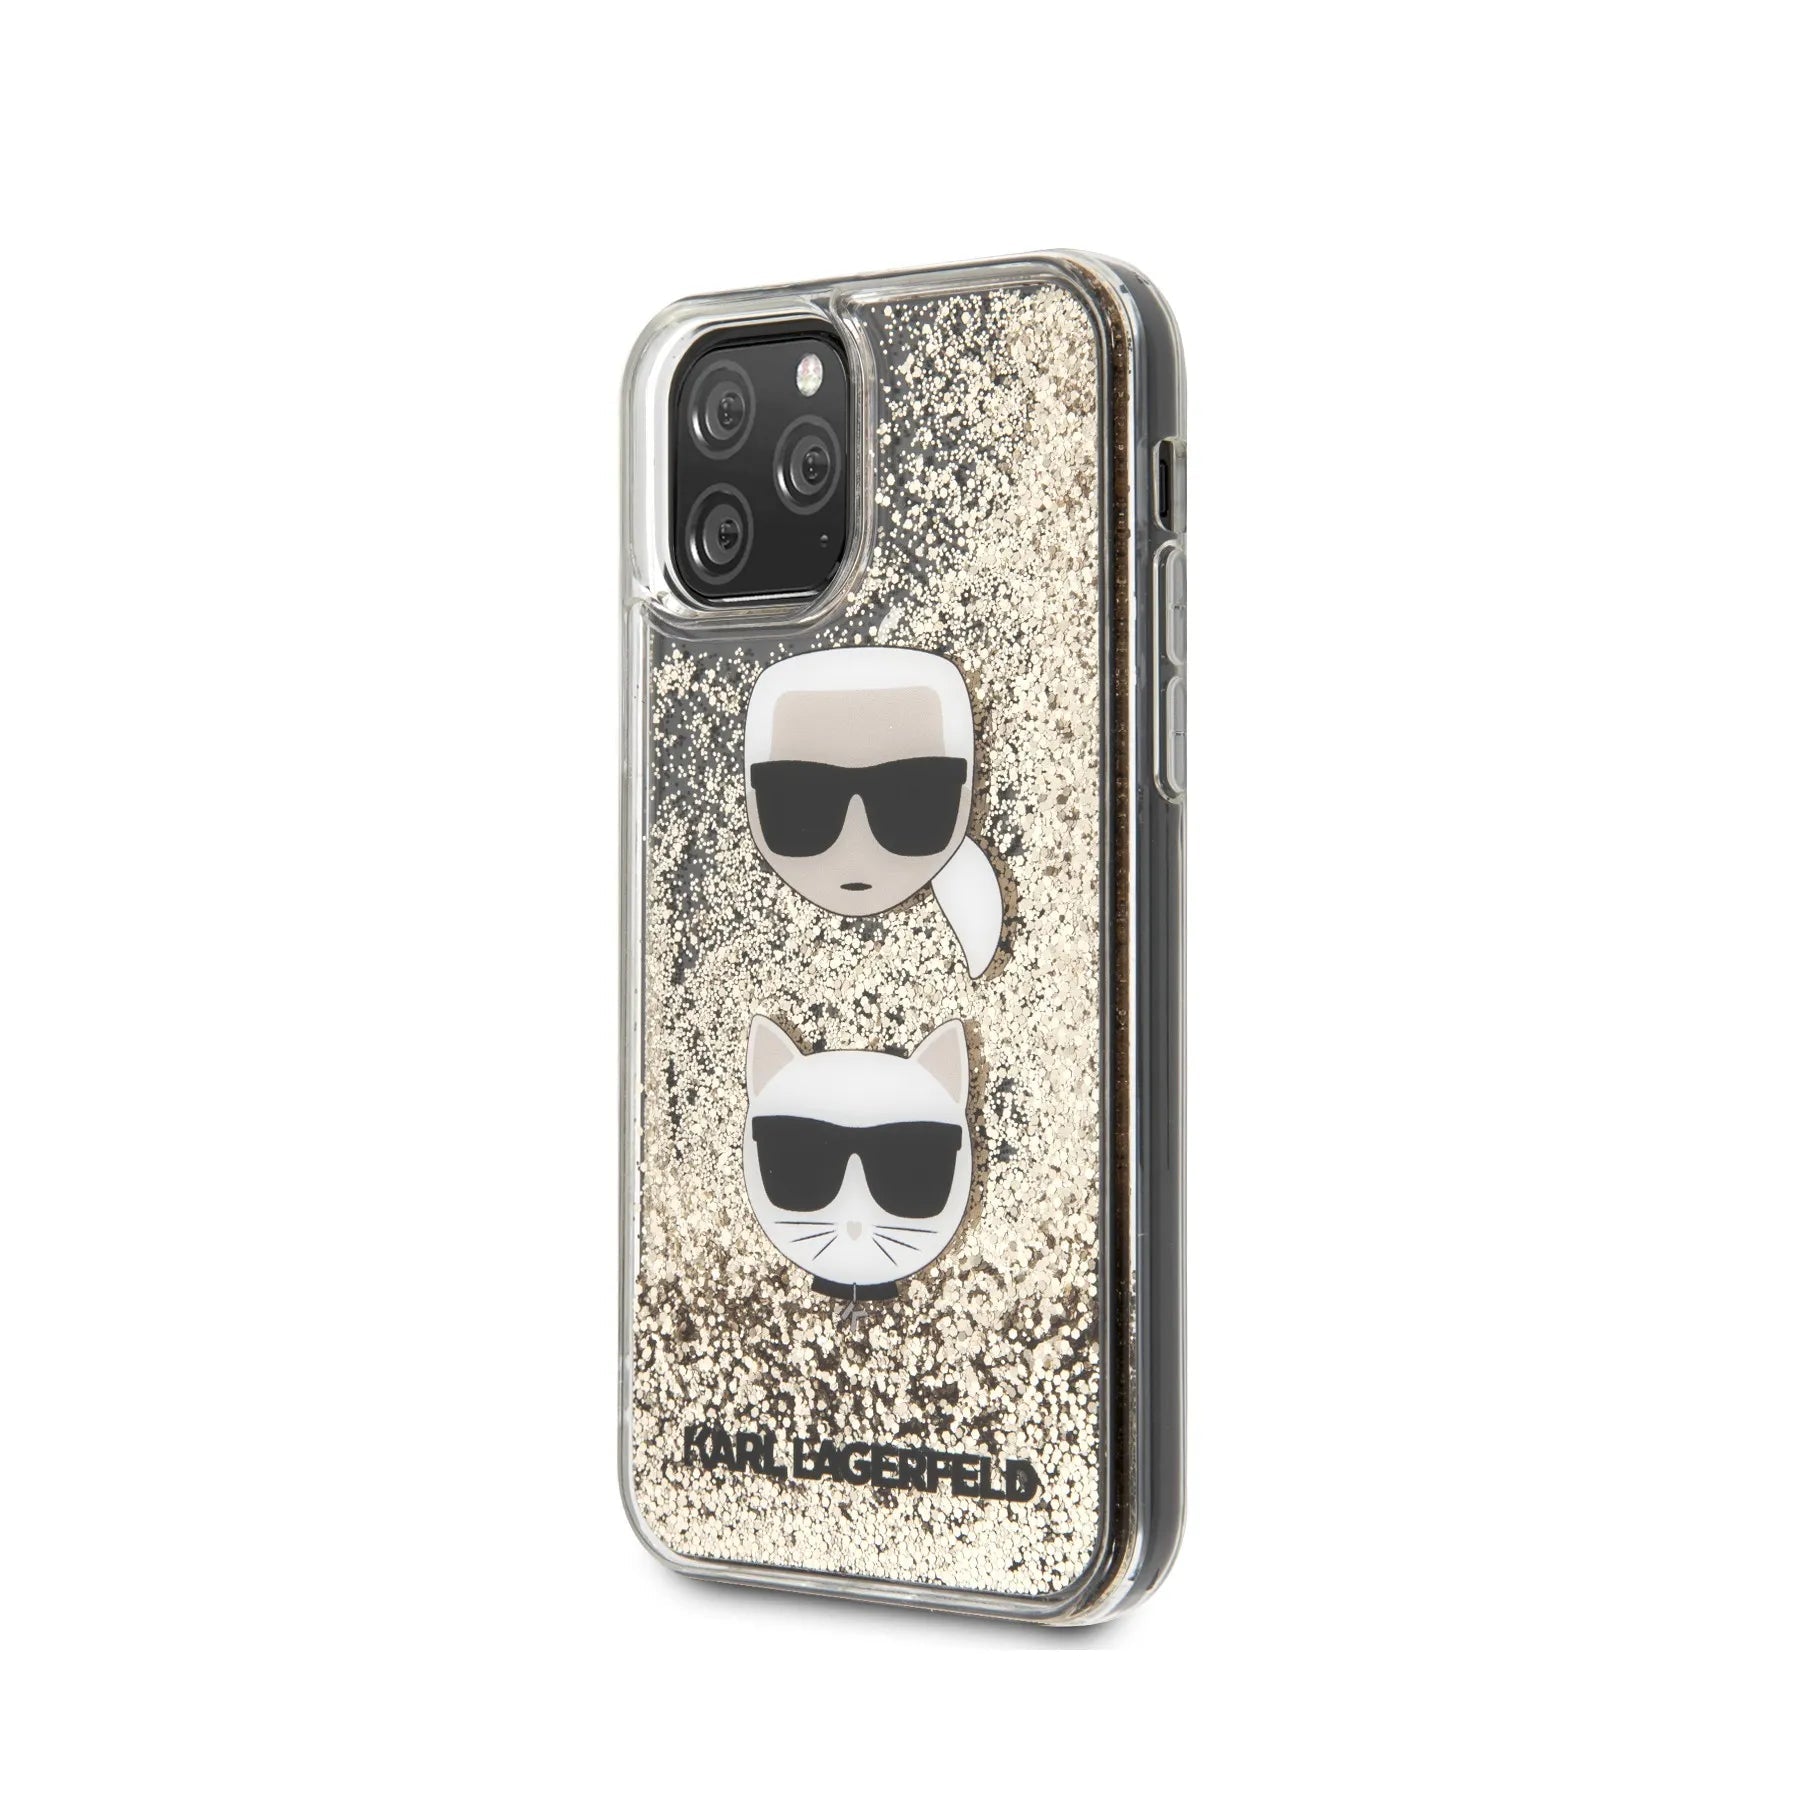 Coque Karl Lagerfeld pour iPhone 11 Pro Max - My Store